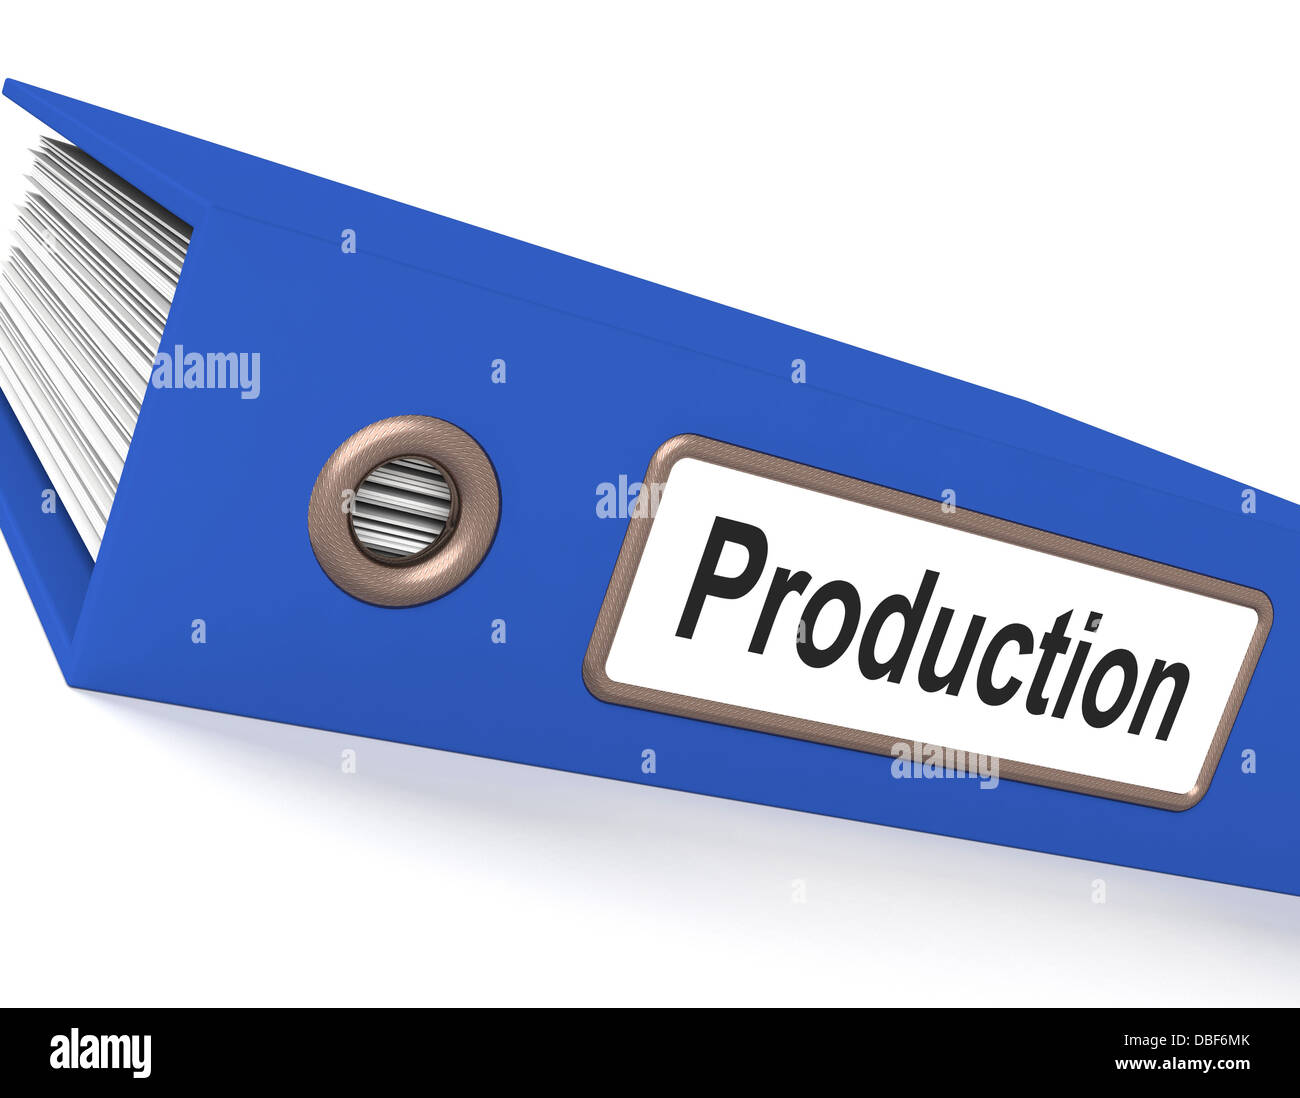 Production File Shows Industry And Supply Records Stock Photo